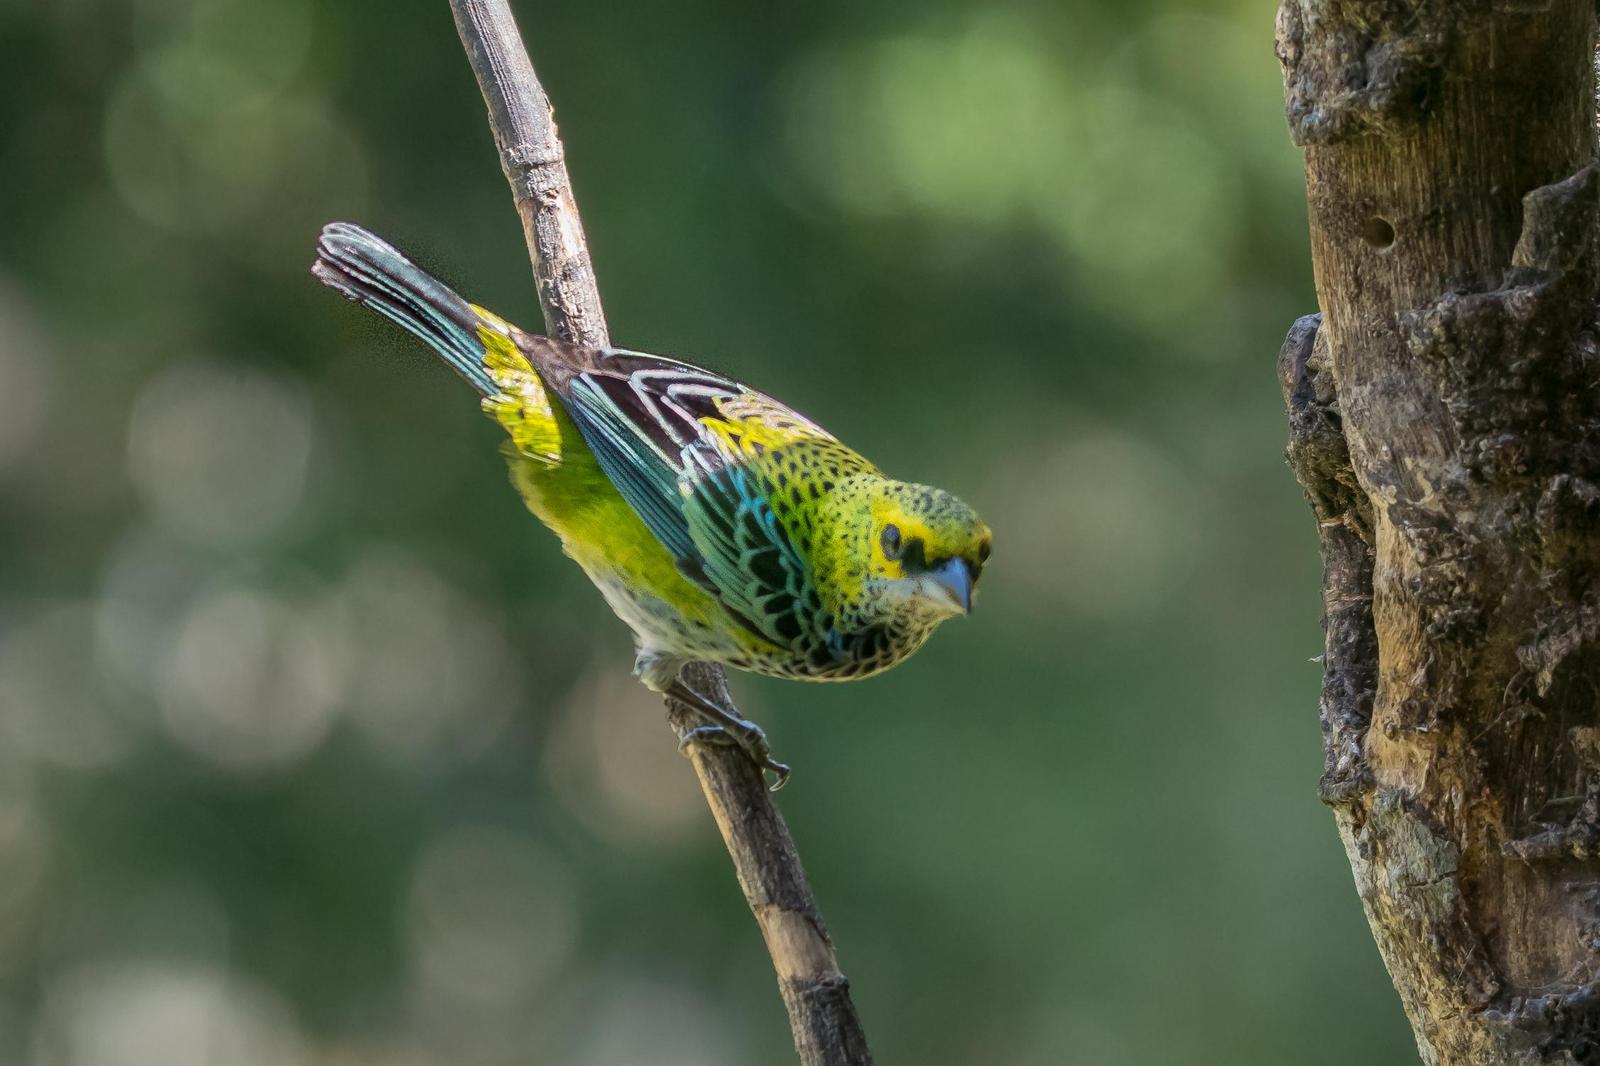 Speckled Tanager Photo by Gerald Hoekstra